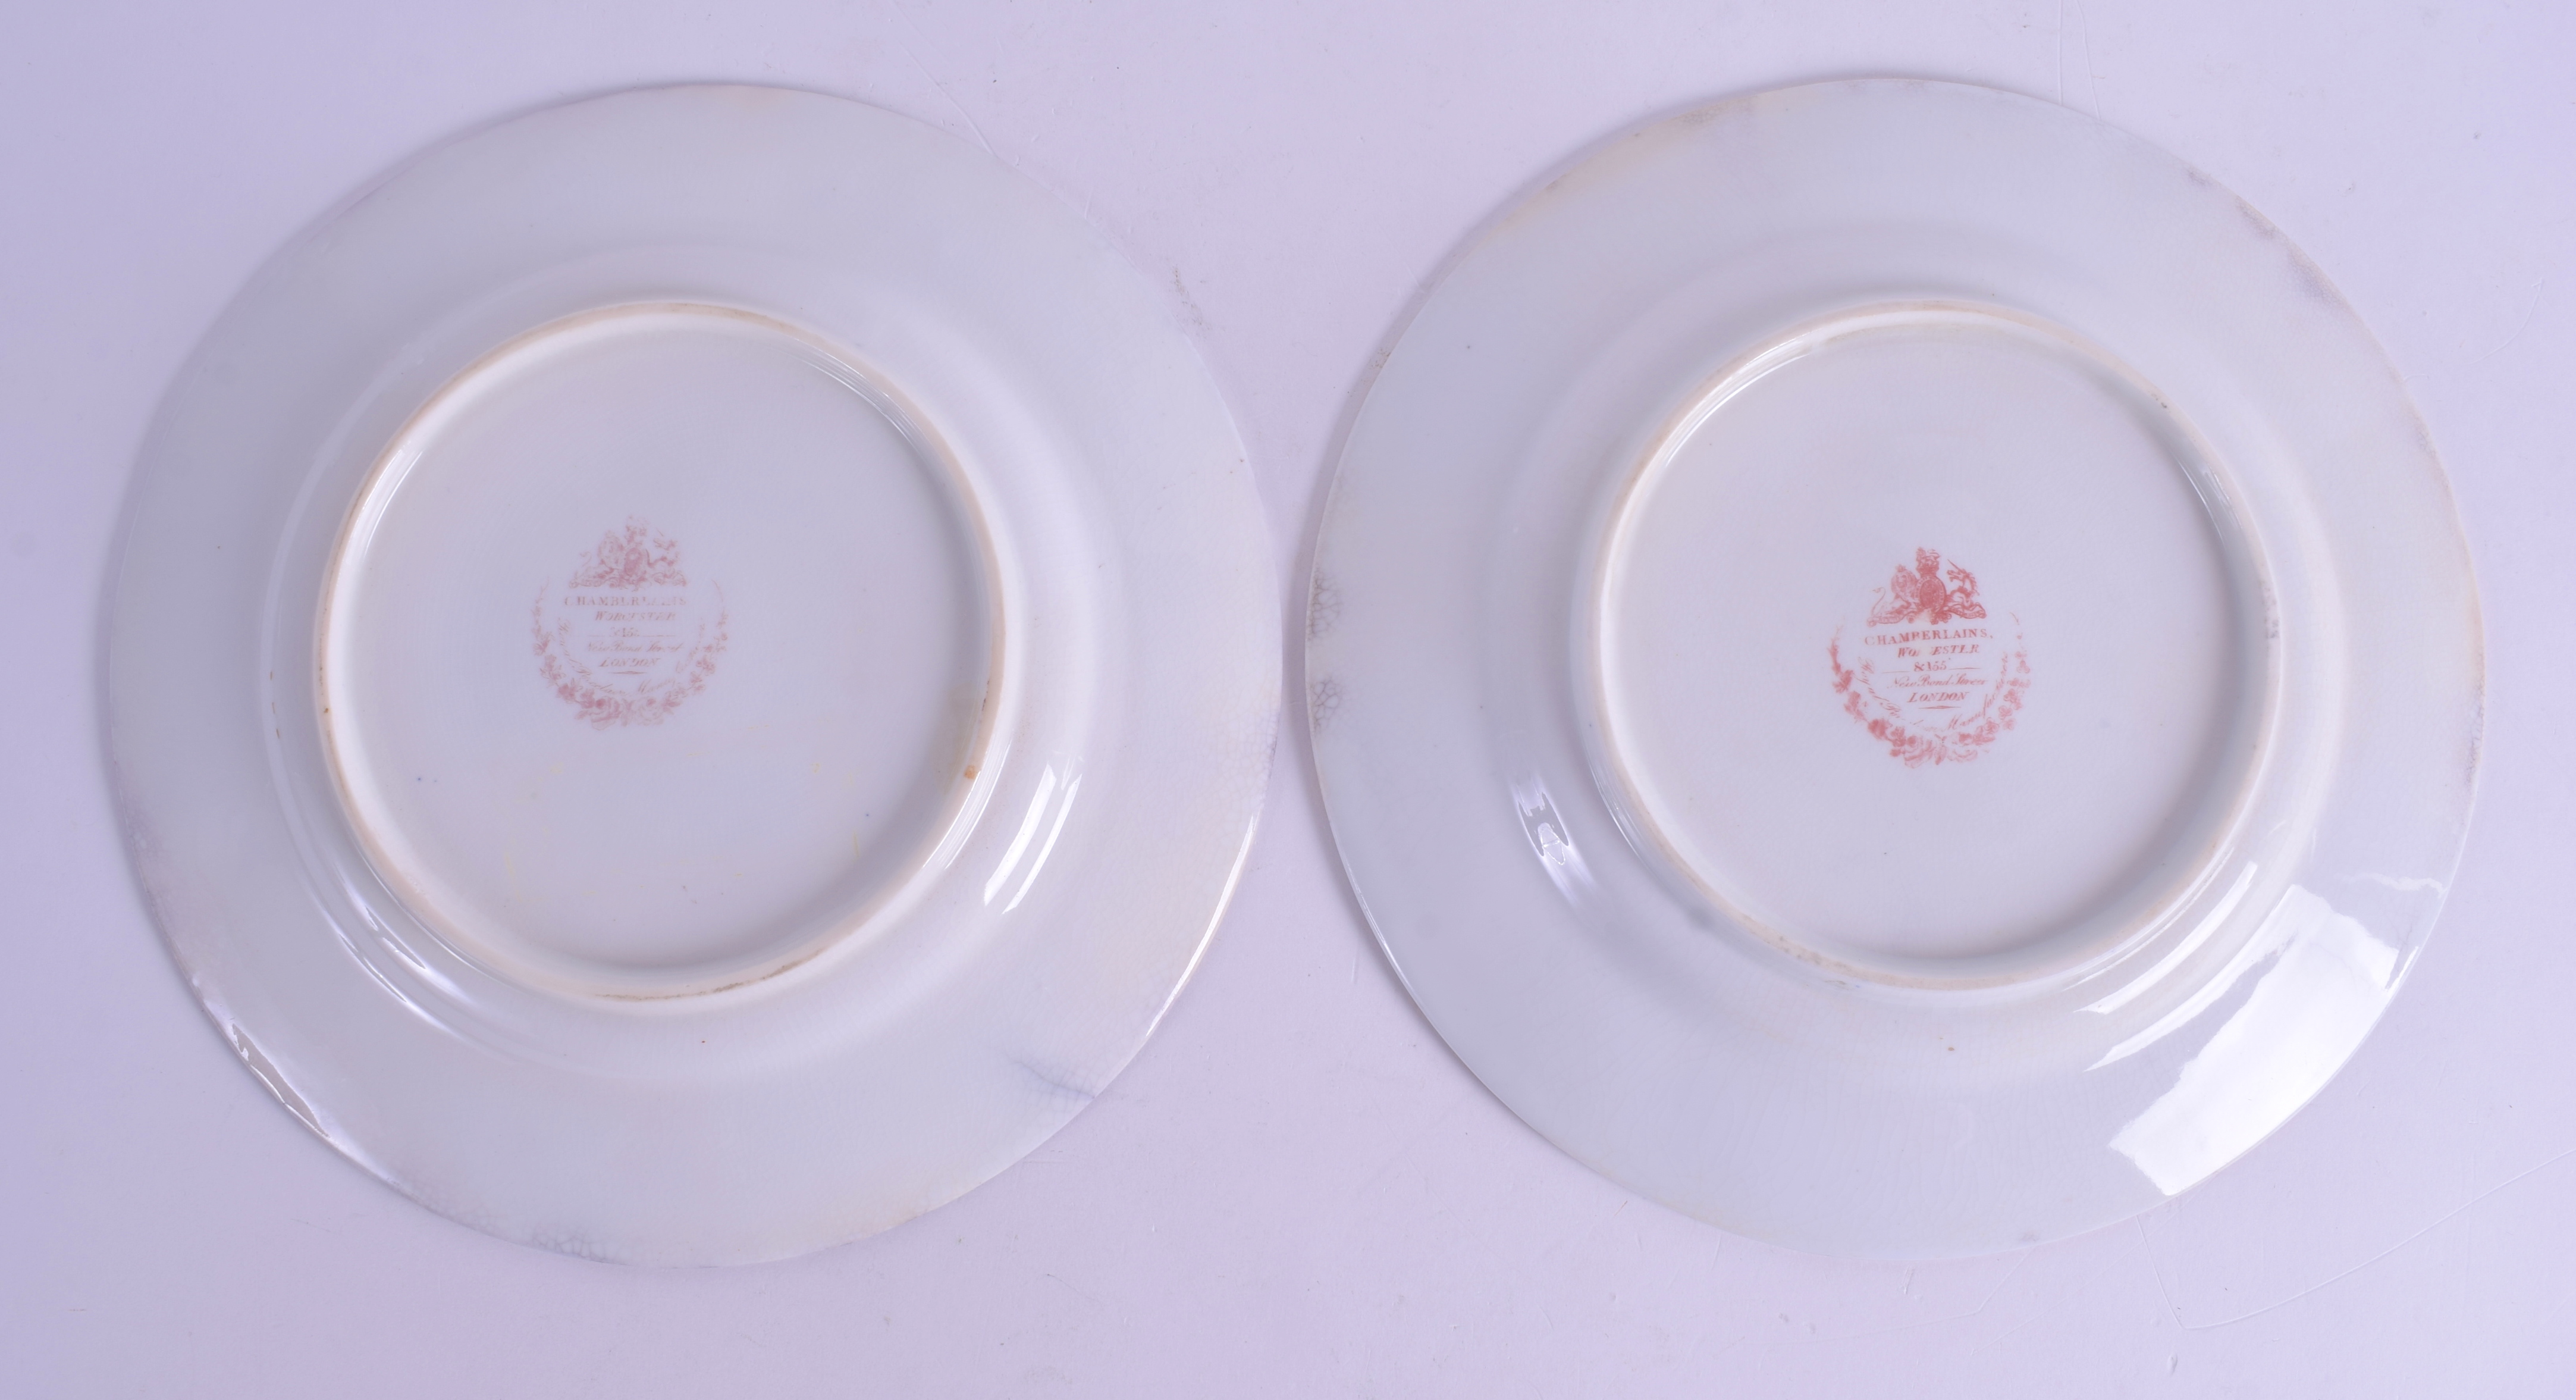 A PAIR OF MID 19TH CENTURY CHAMBERLAINS WORCESTER PLATES painted with the crest of the Skinner Fami - Image 2 of 2